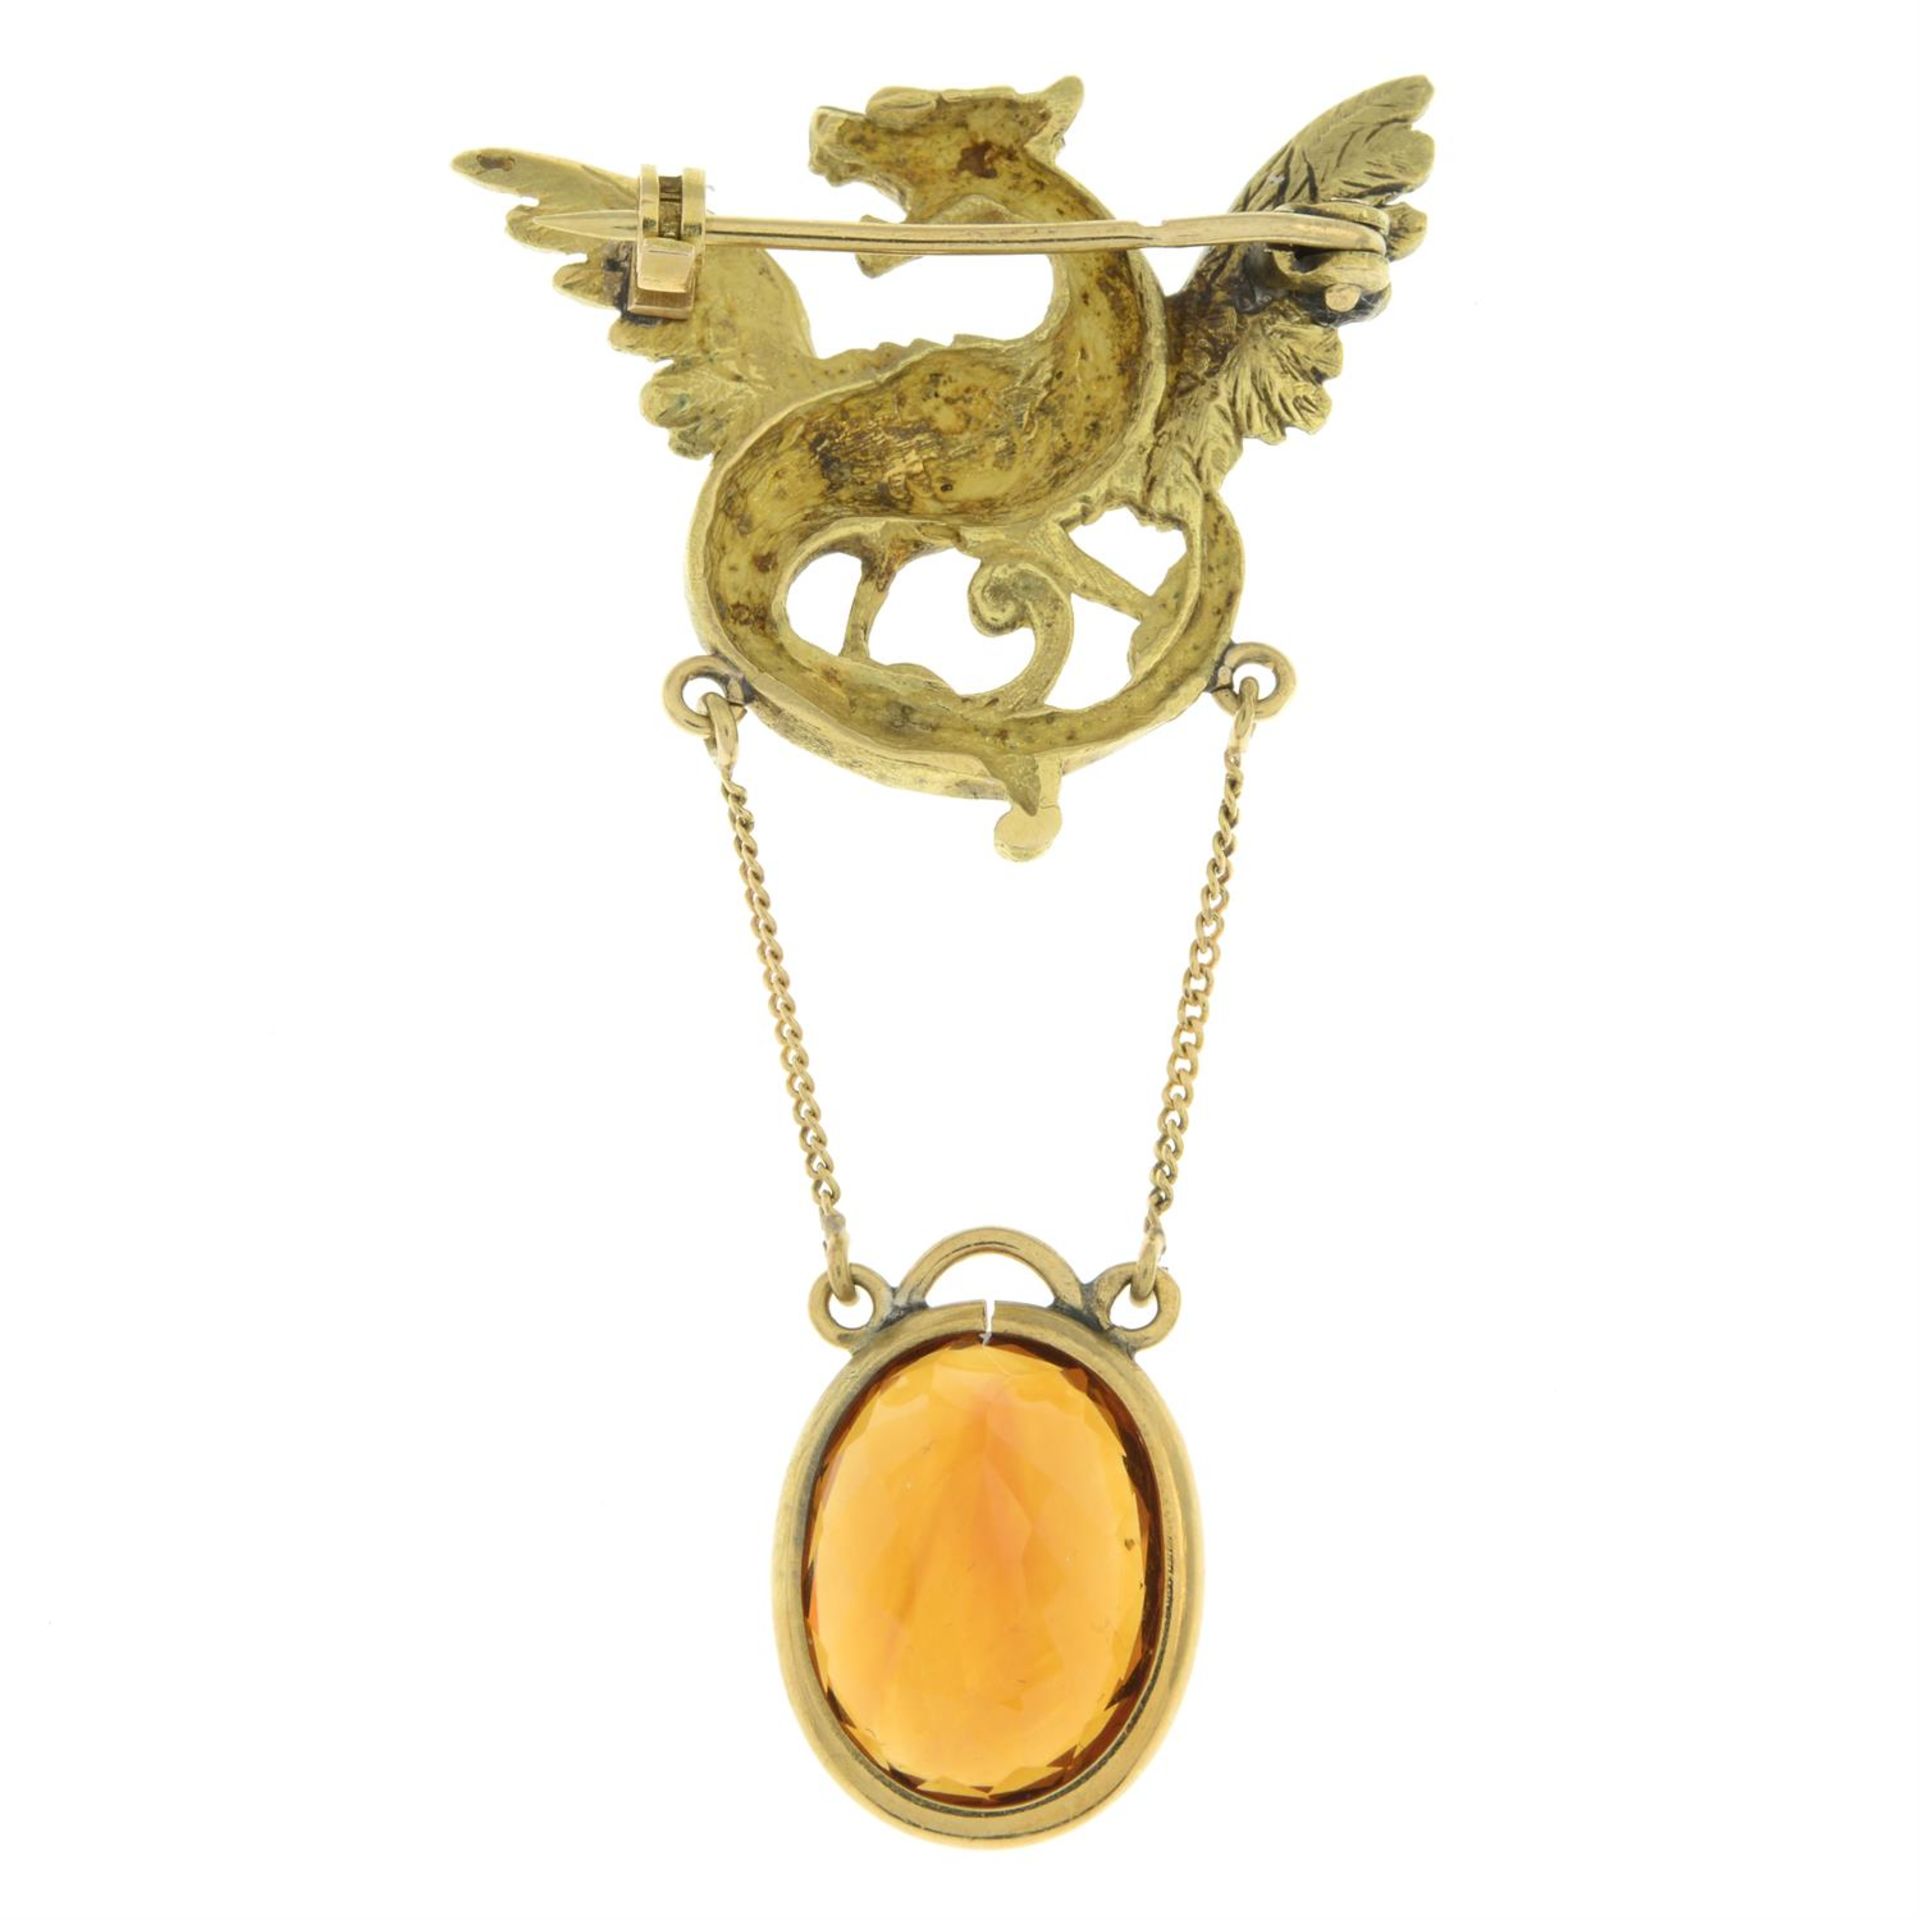 Early 20th century gold griffin brooch - Image 3 of 4